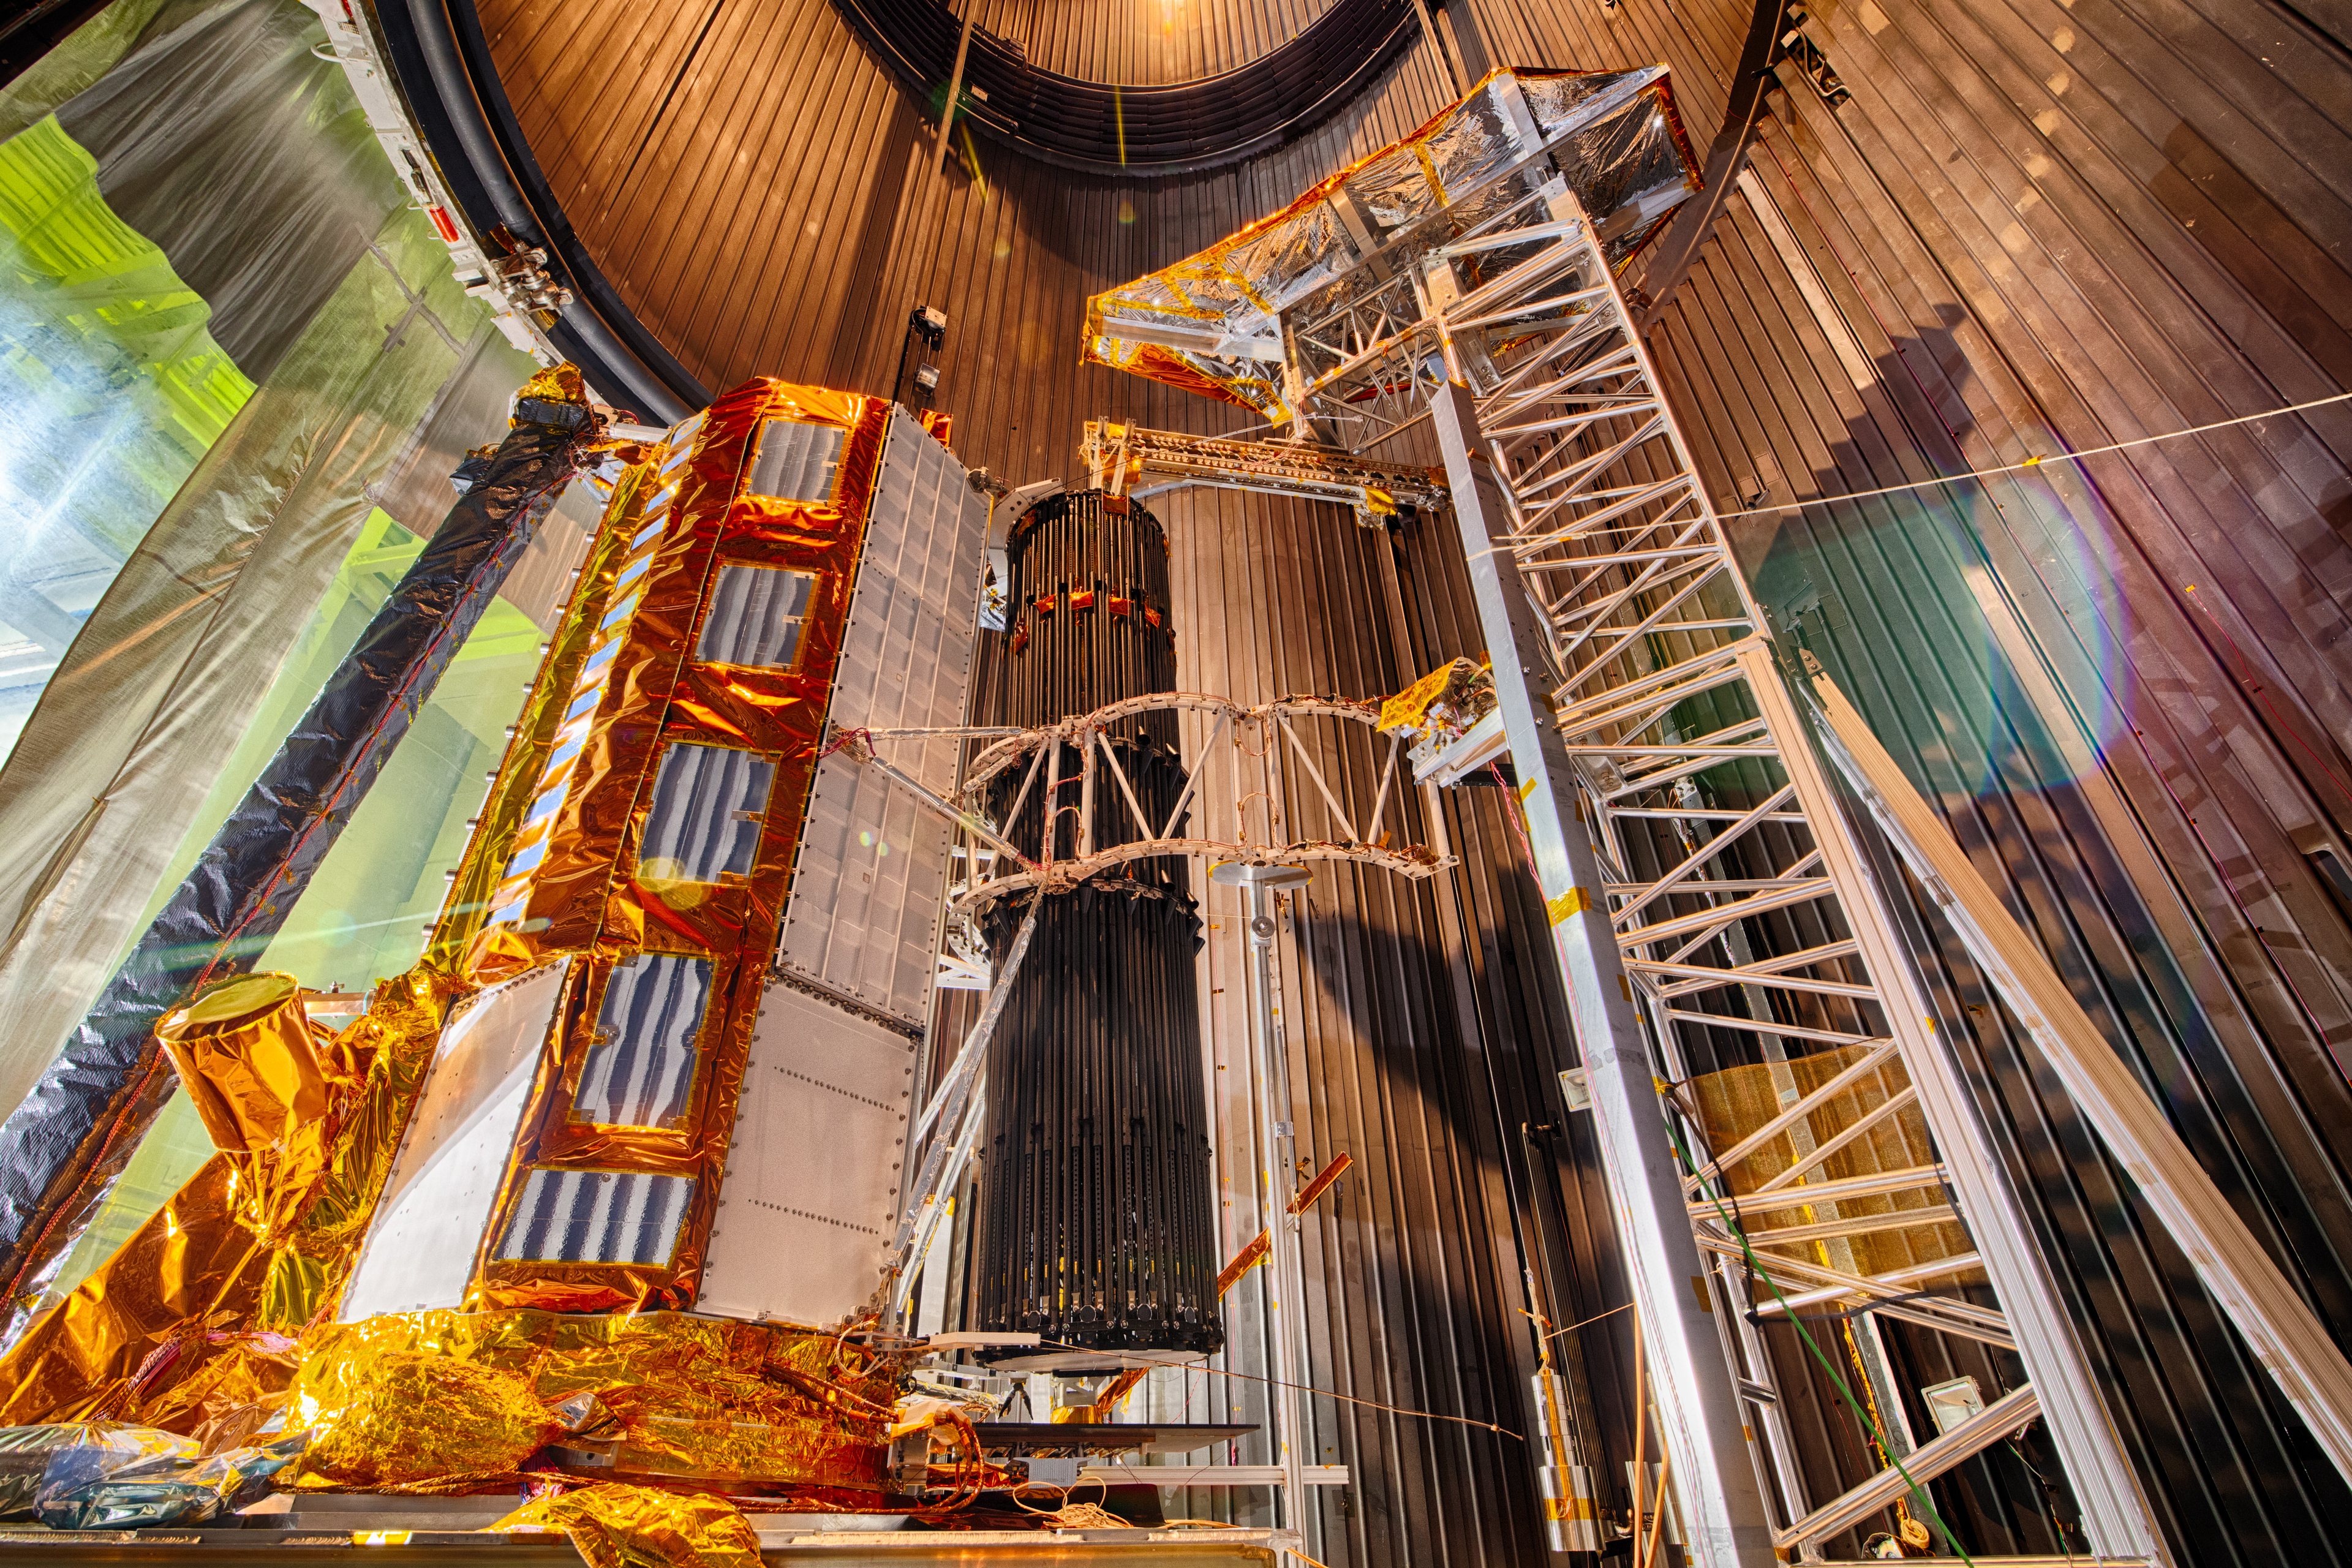 A close-up of the flight antenna system inside the thermal vacuum testing chamber